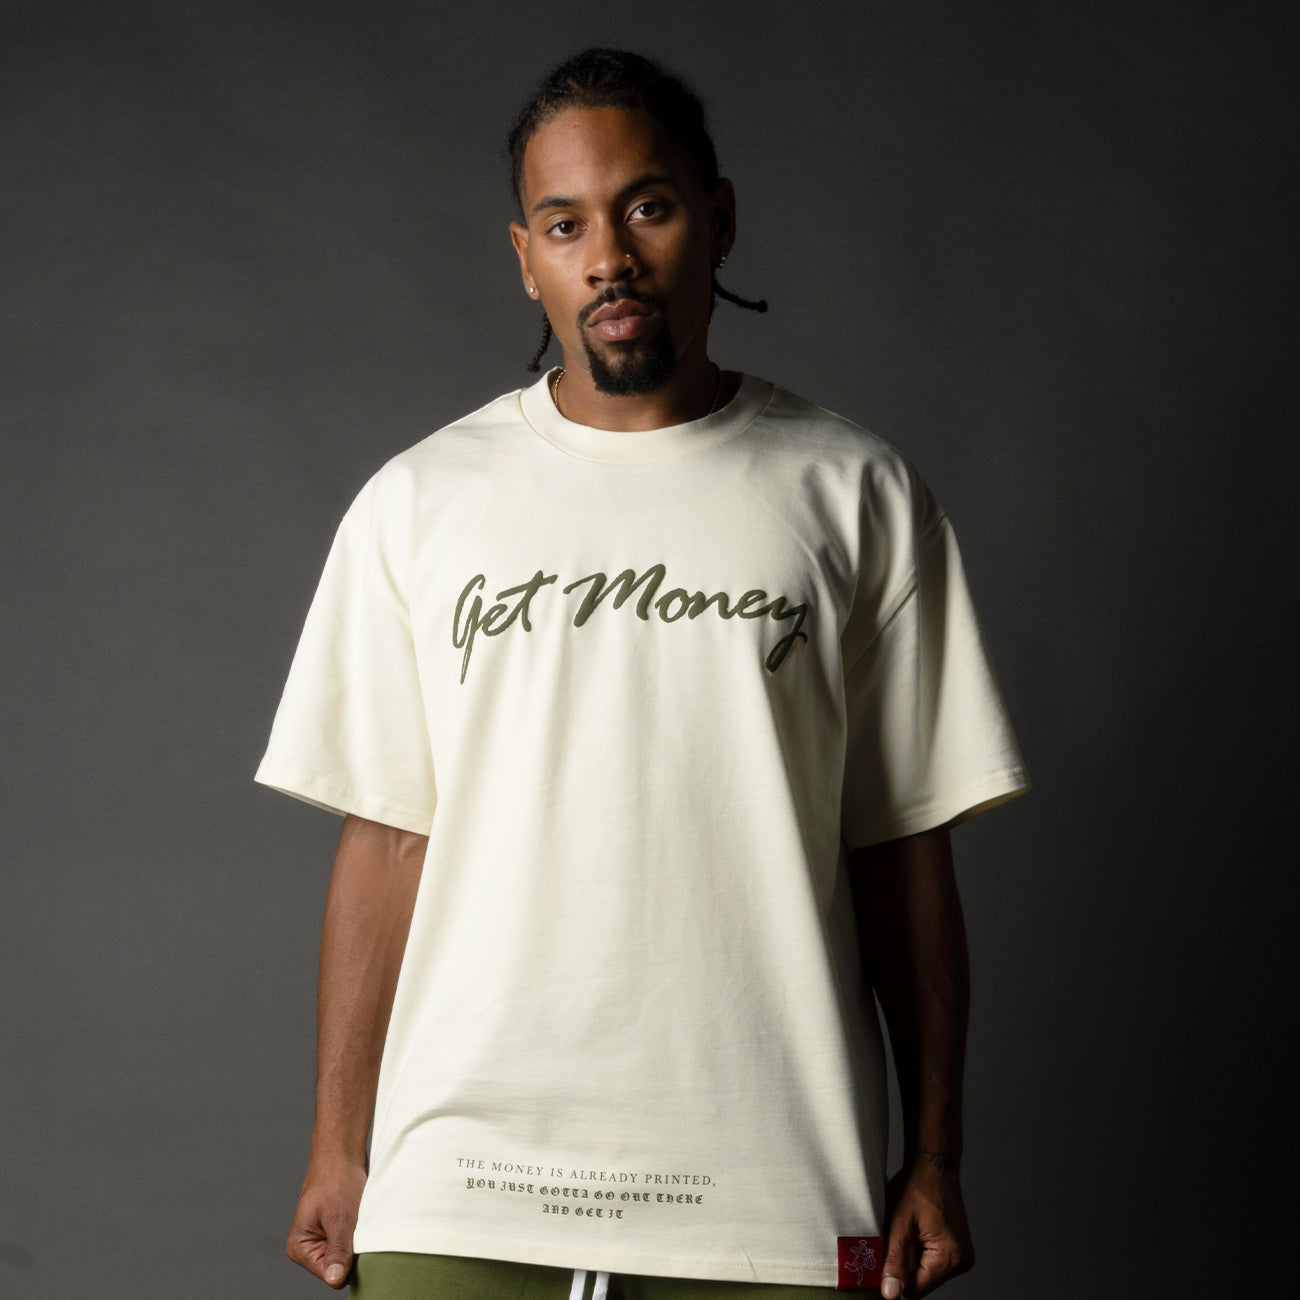 GM Money Printed - ULTRA HW Red Label Tee - Butter